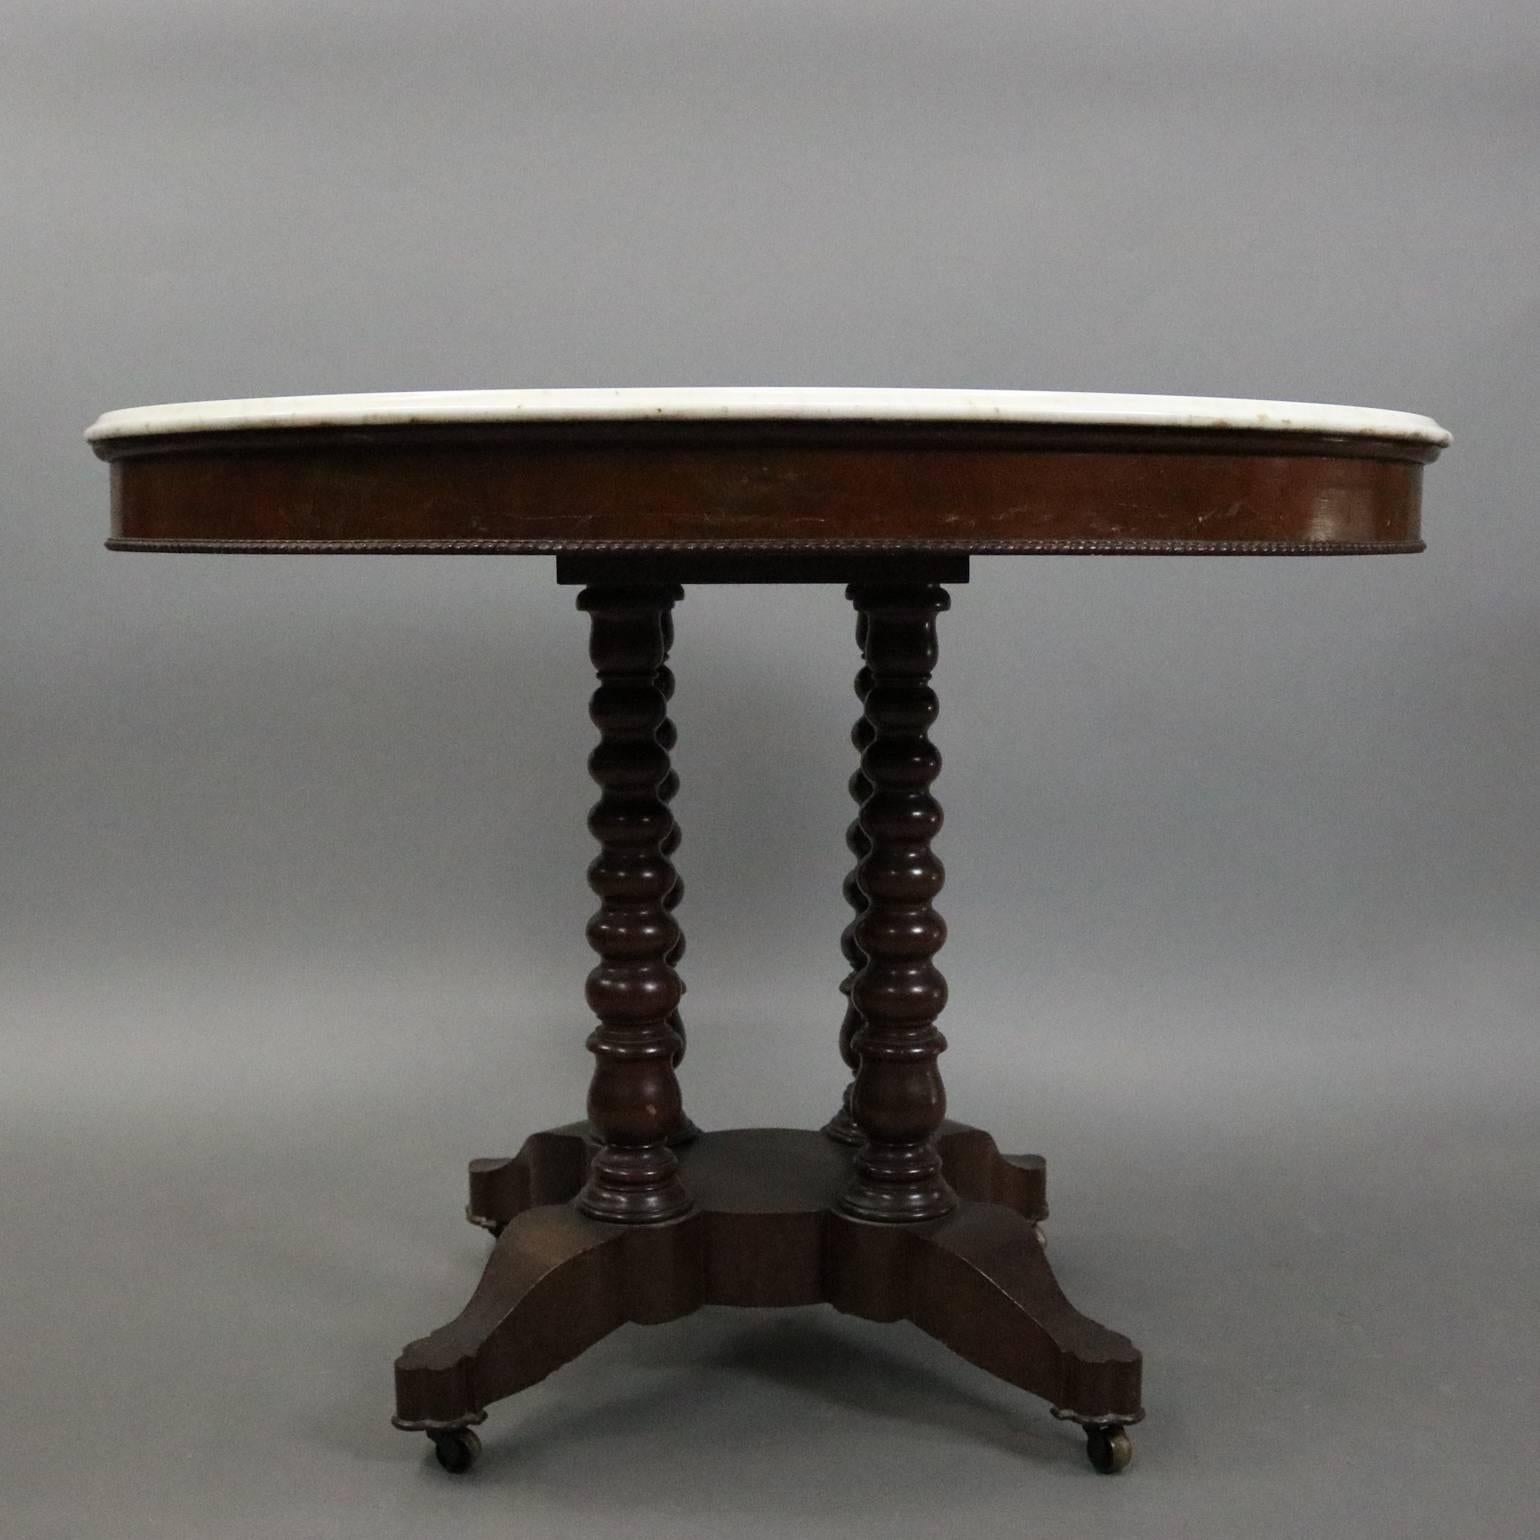 19th Century Antique Carved Walnut and Marble Oval Parlor Lamp Table, circa 1880